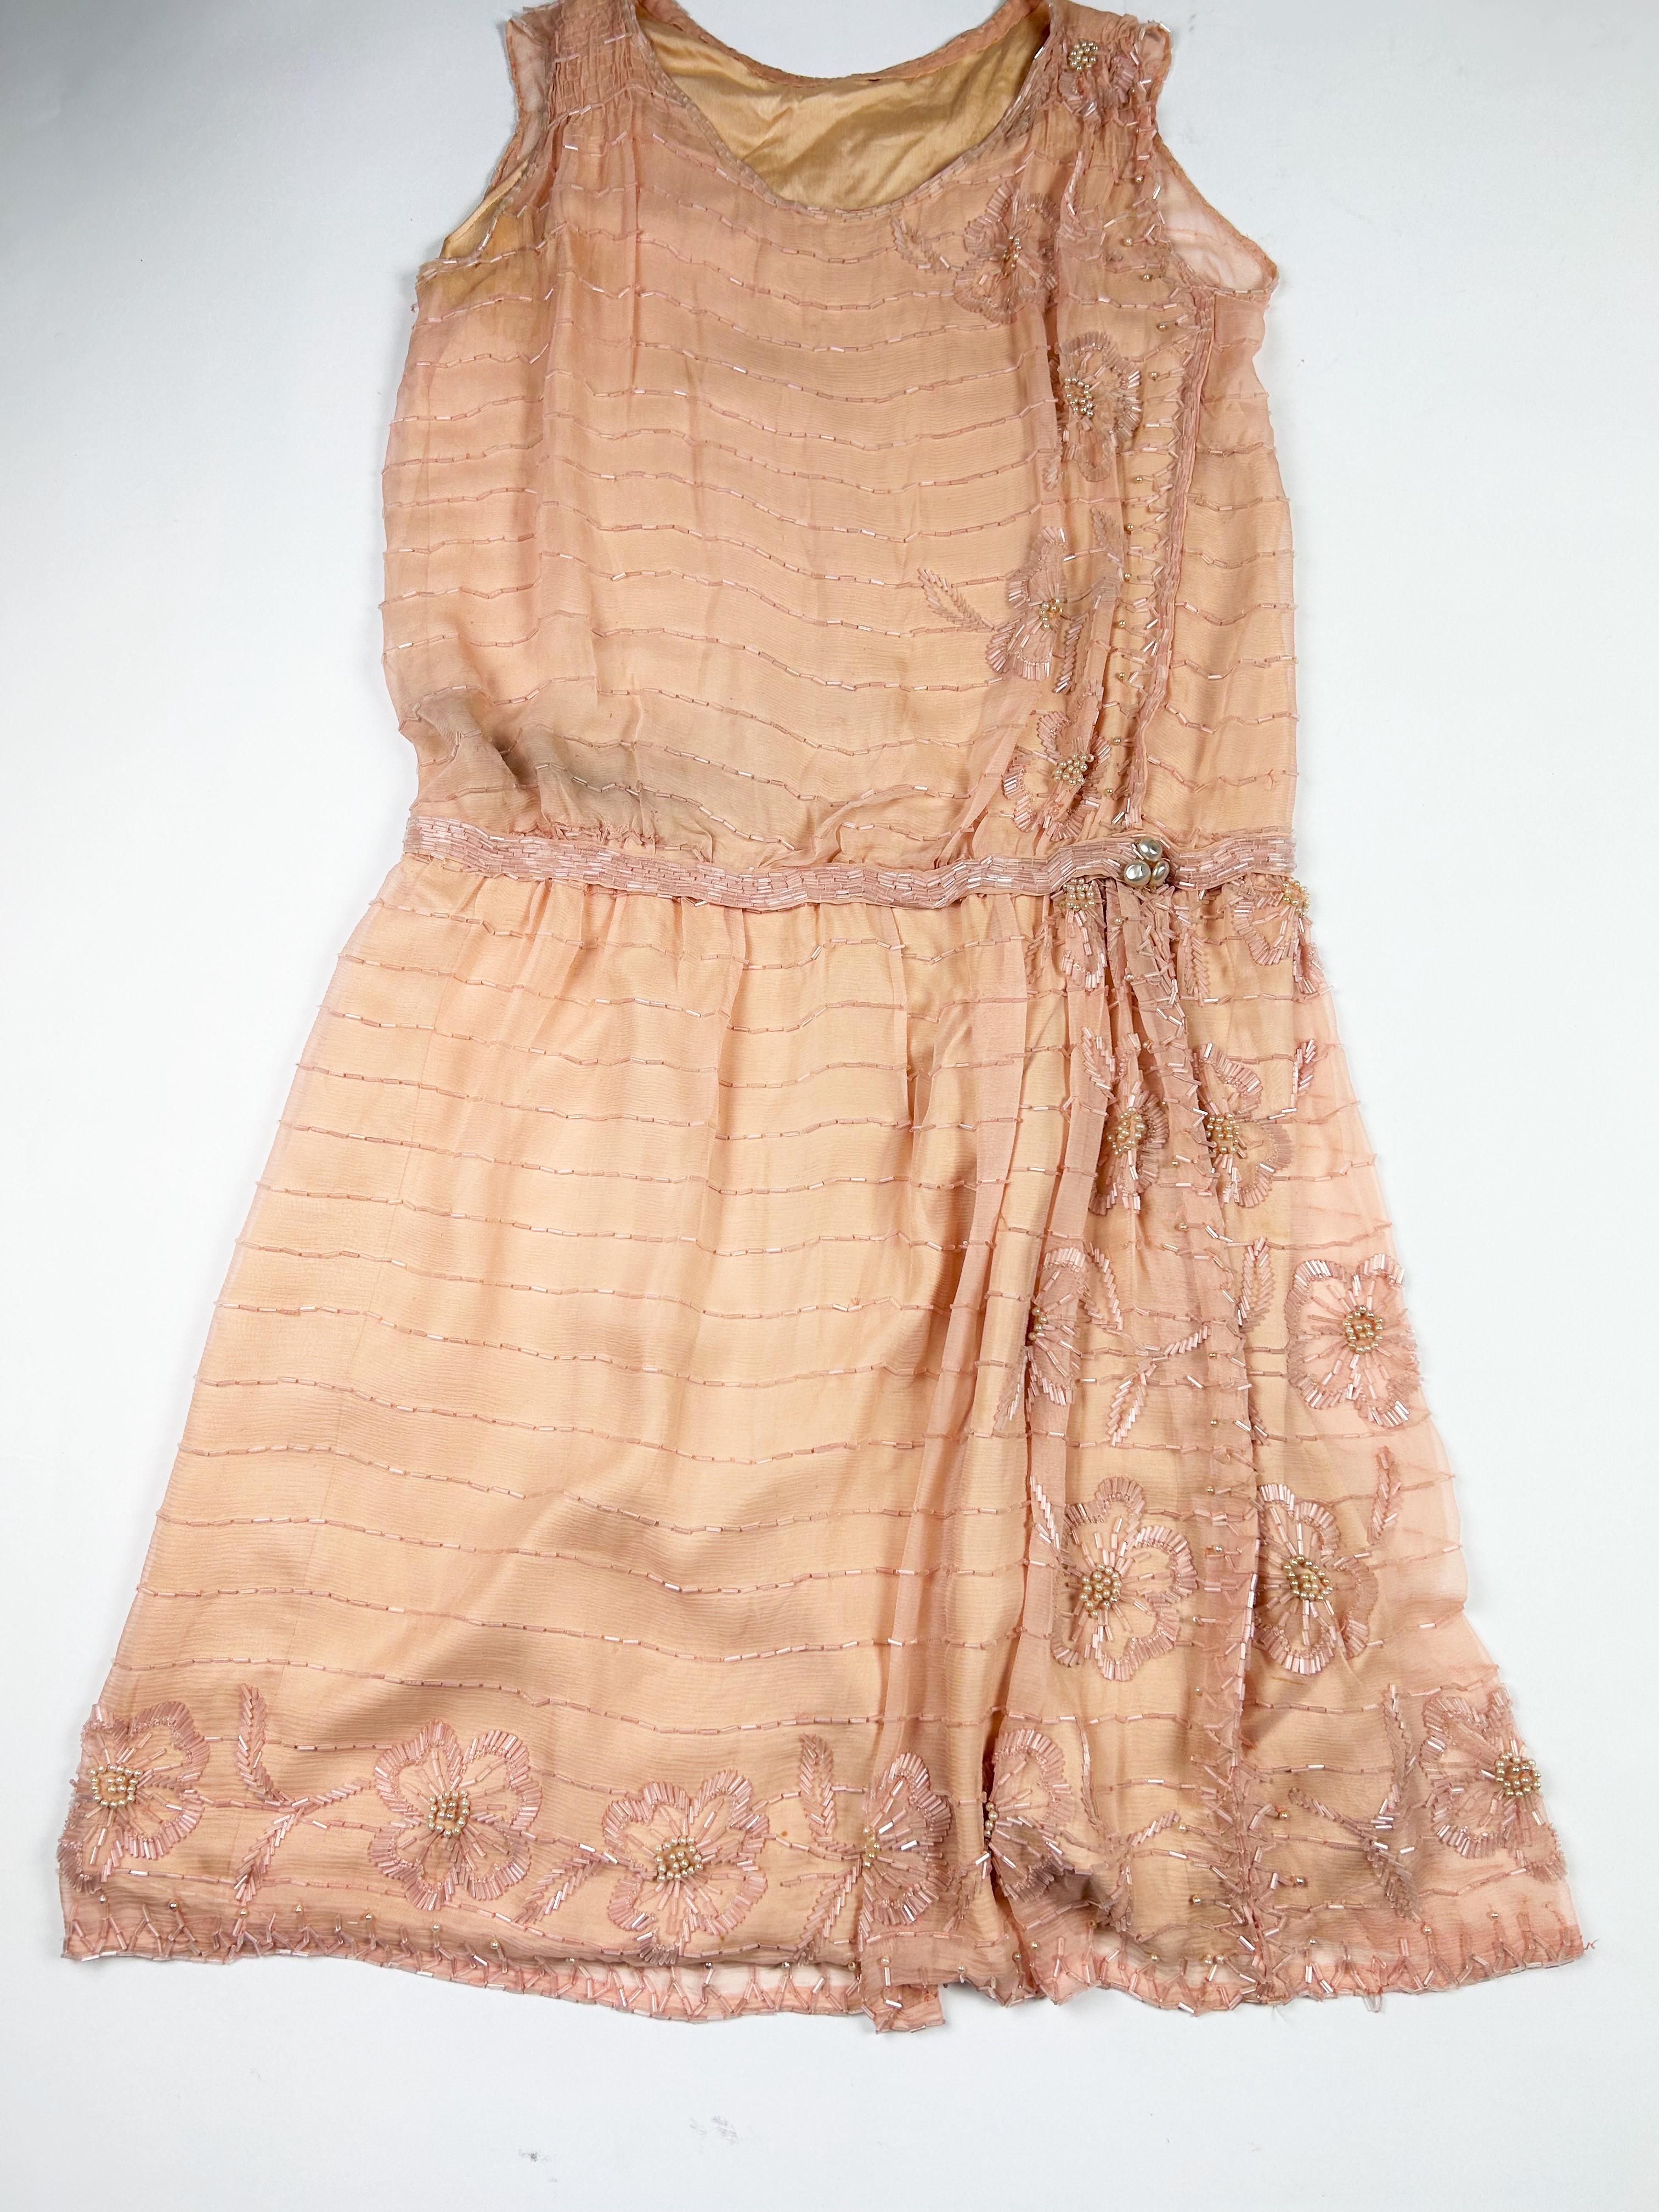 Circa 1920-1925

France

Beautiful Art Deco ball gown or ceremonial dress in pale salmon pink silk crepe entirely embroidered with tubular glass beads and pearls. Straight sleeveless cut with an asymmetrical blousant effect on the hips punctuated by